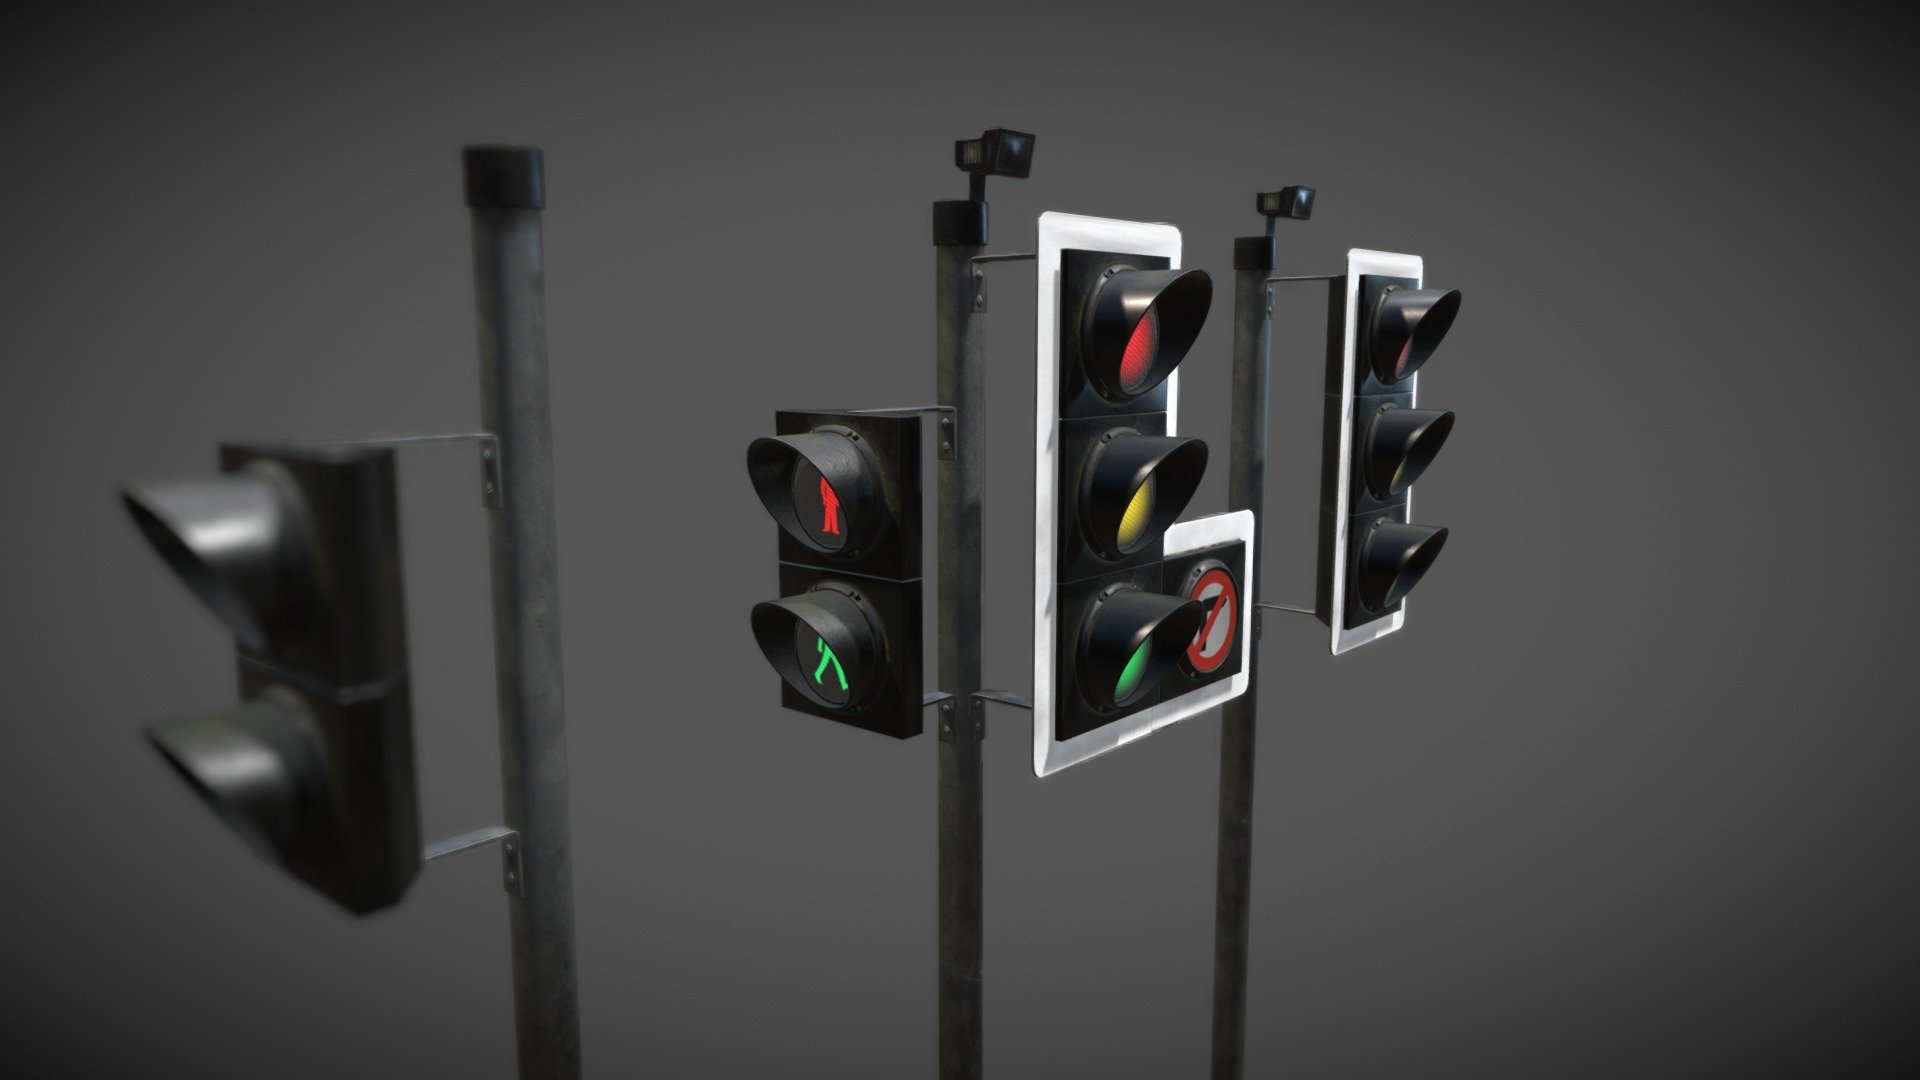 Low poly PBR UK traffic lights.

1786 polys

2048x2048 PBR textures

Also included is the original .blender file for ease of editing the mes 3d model